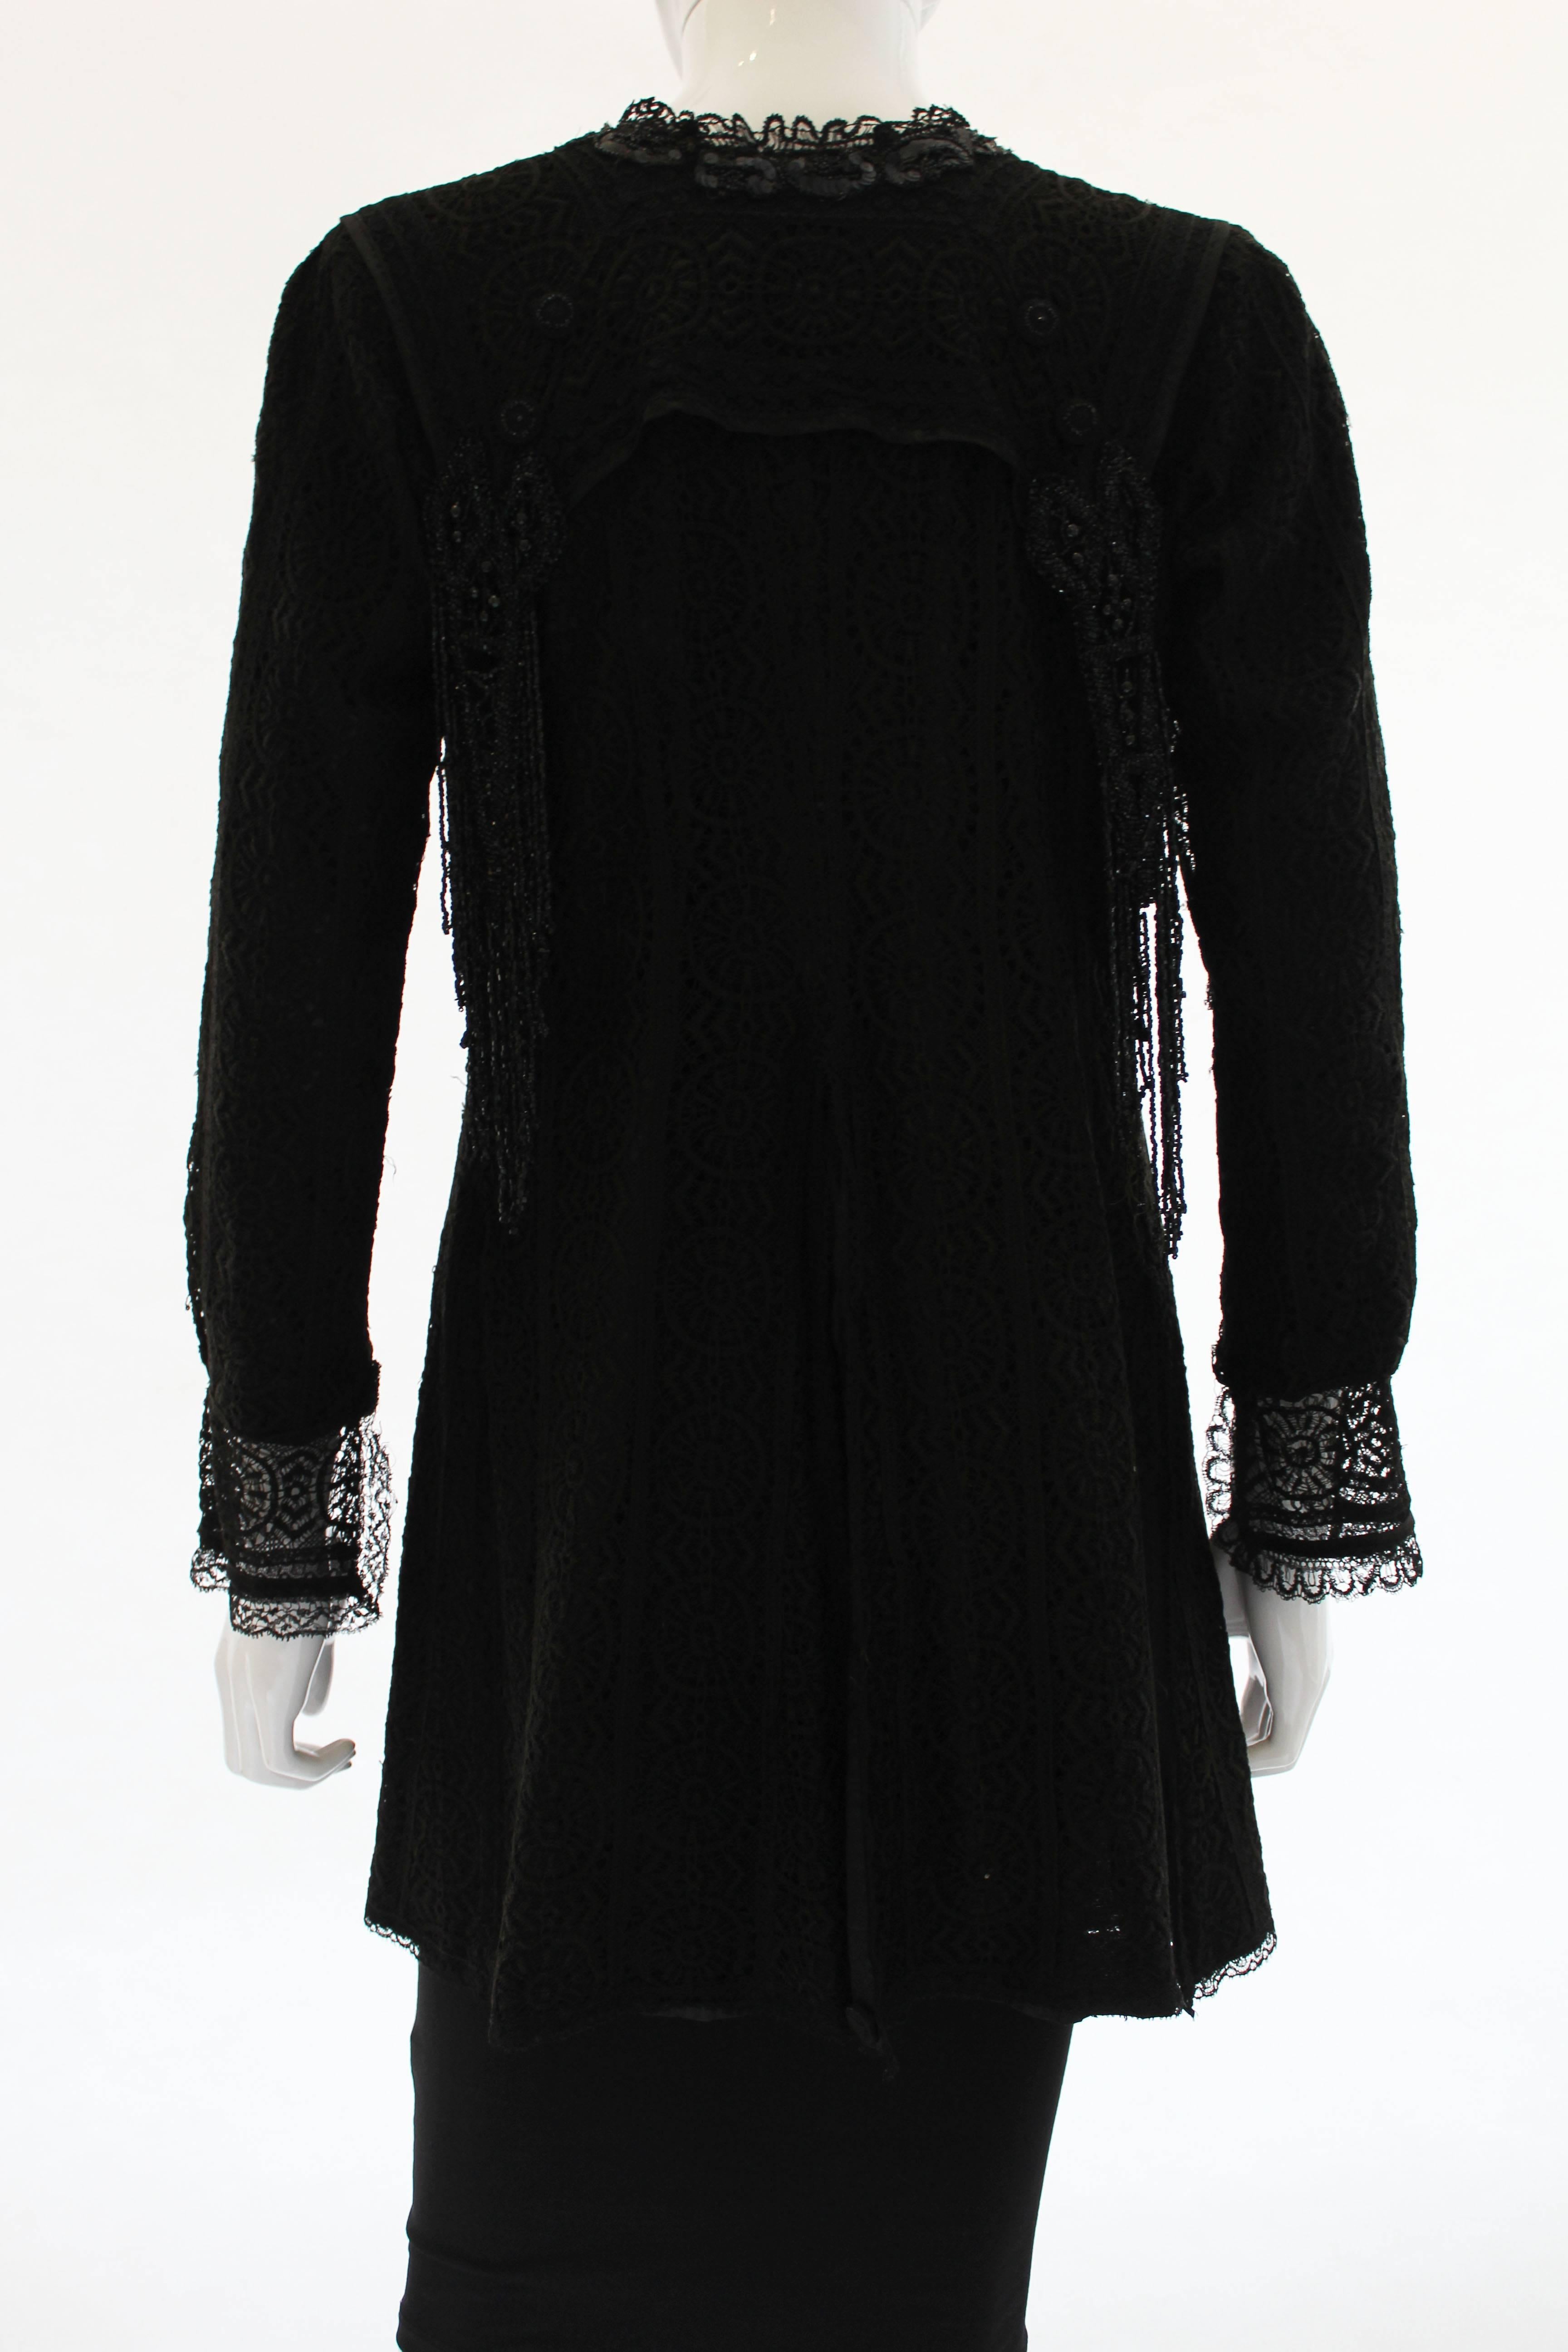 Women's Antique Victorian Black Lace Jacket with Jet Beading